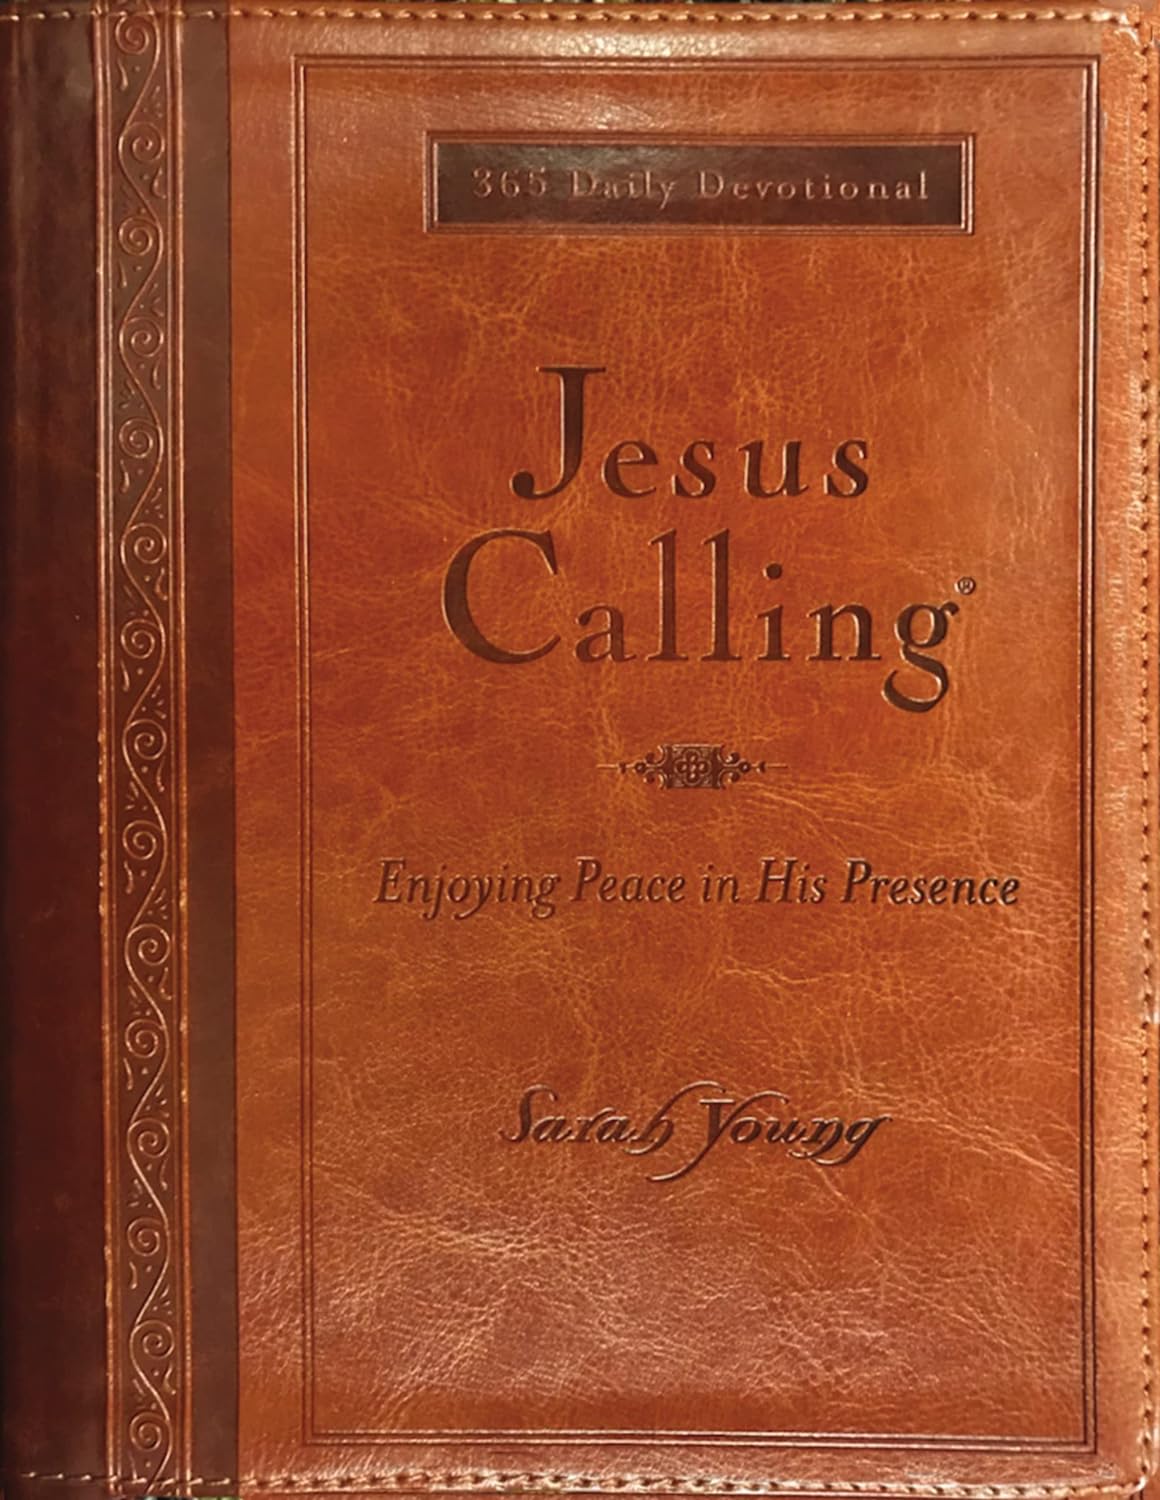 Jesus Calling 365 Day Devotional: Enjoying Peace in His Presence by Sarah Young